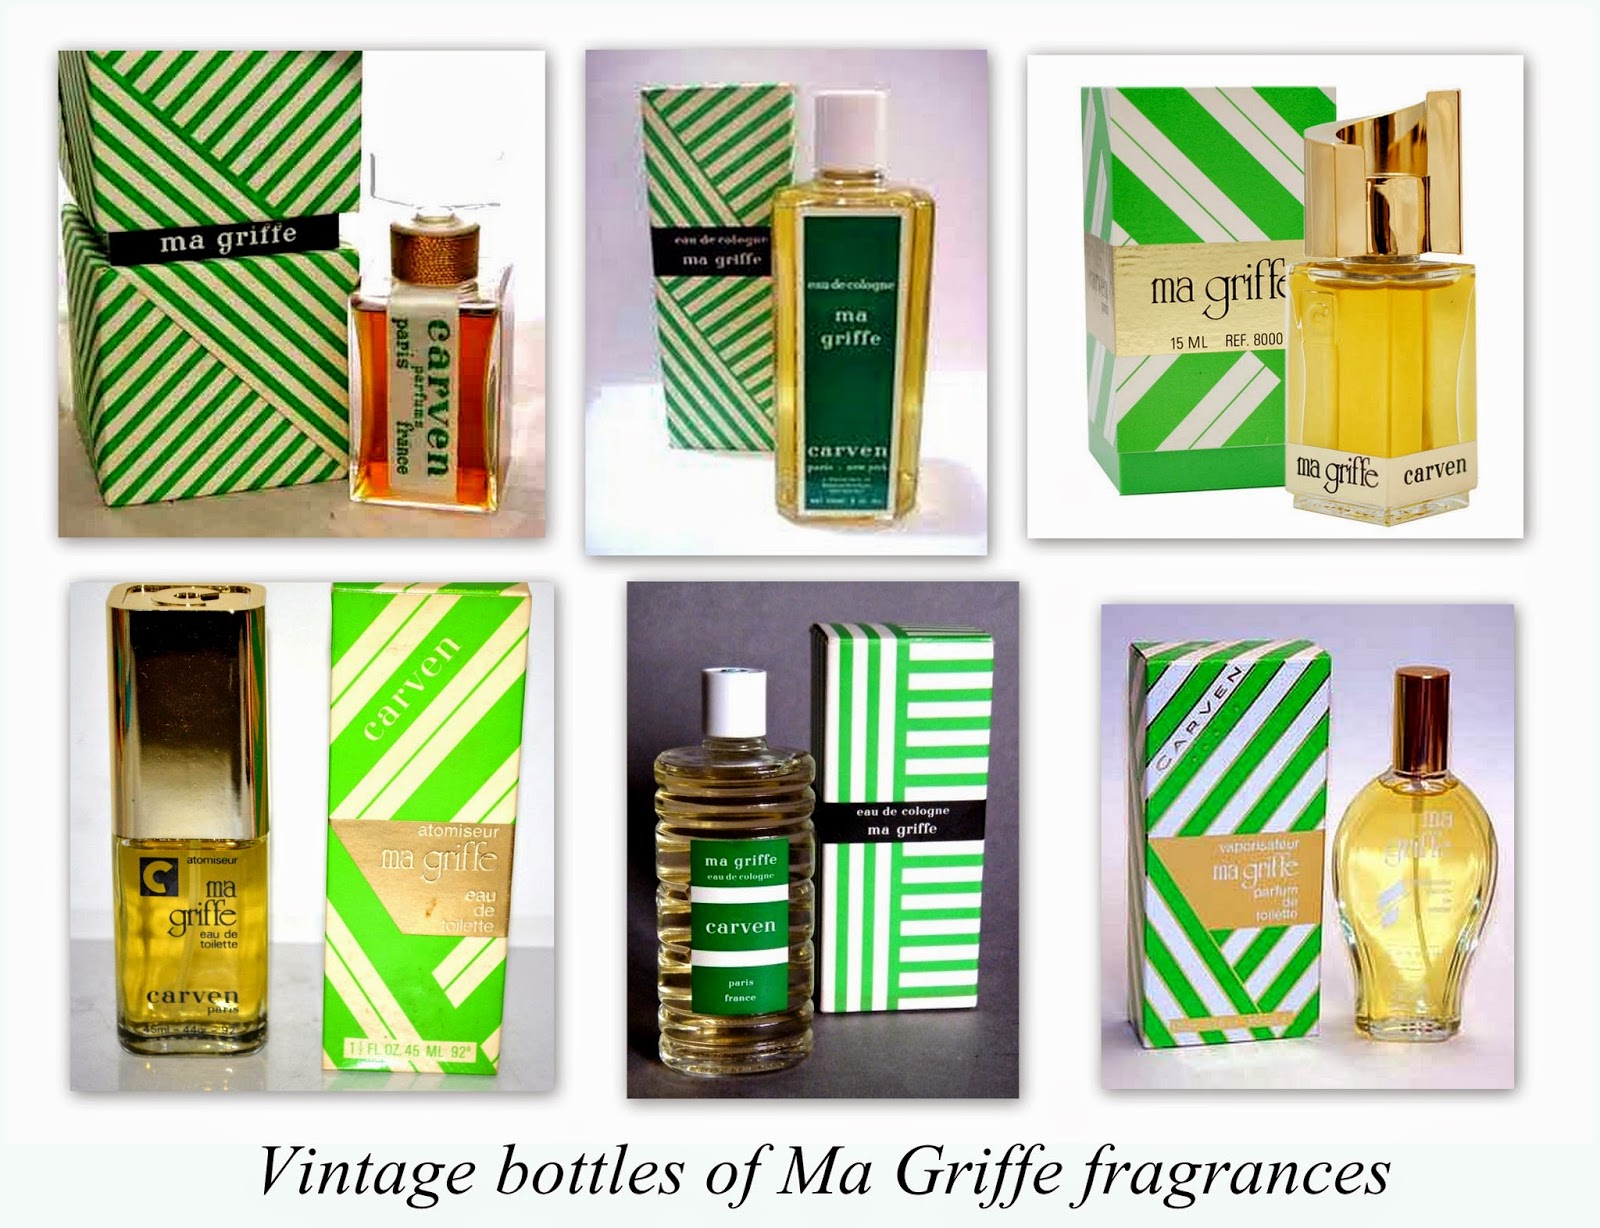 CARVEN MA GRIFFE - Perfumes and Beauty - Fragrances